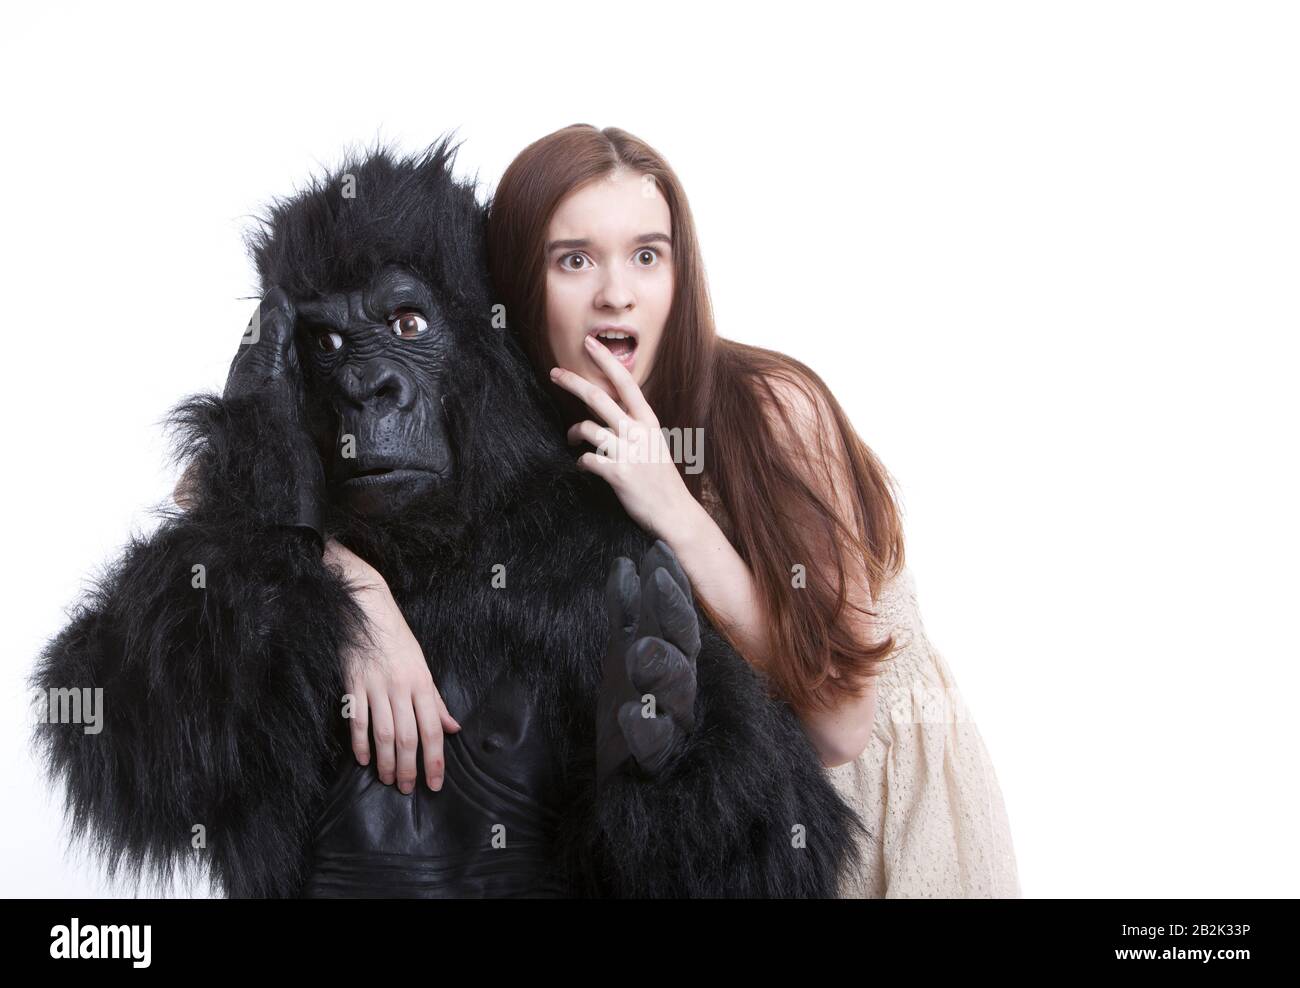 Shocked young woman with irritated man in gorilla costume against white background Stock Photo